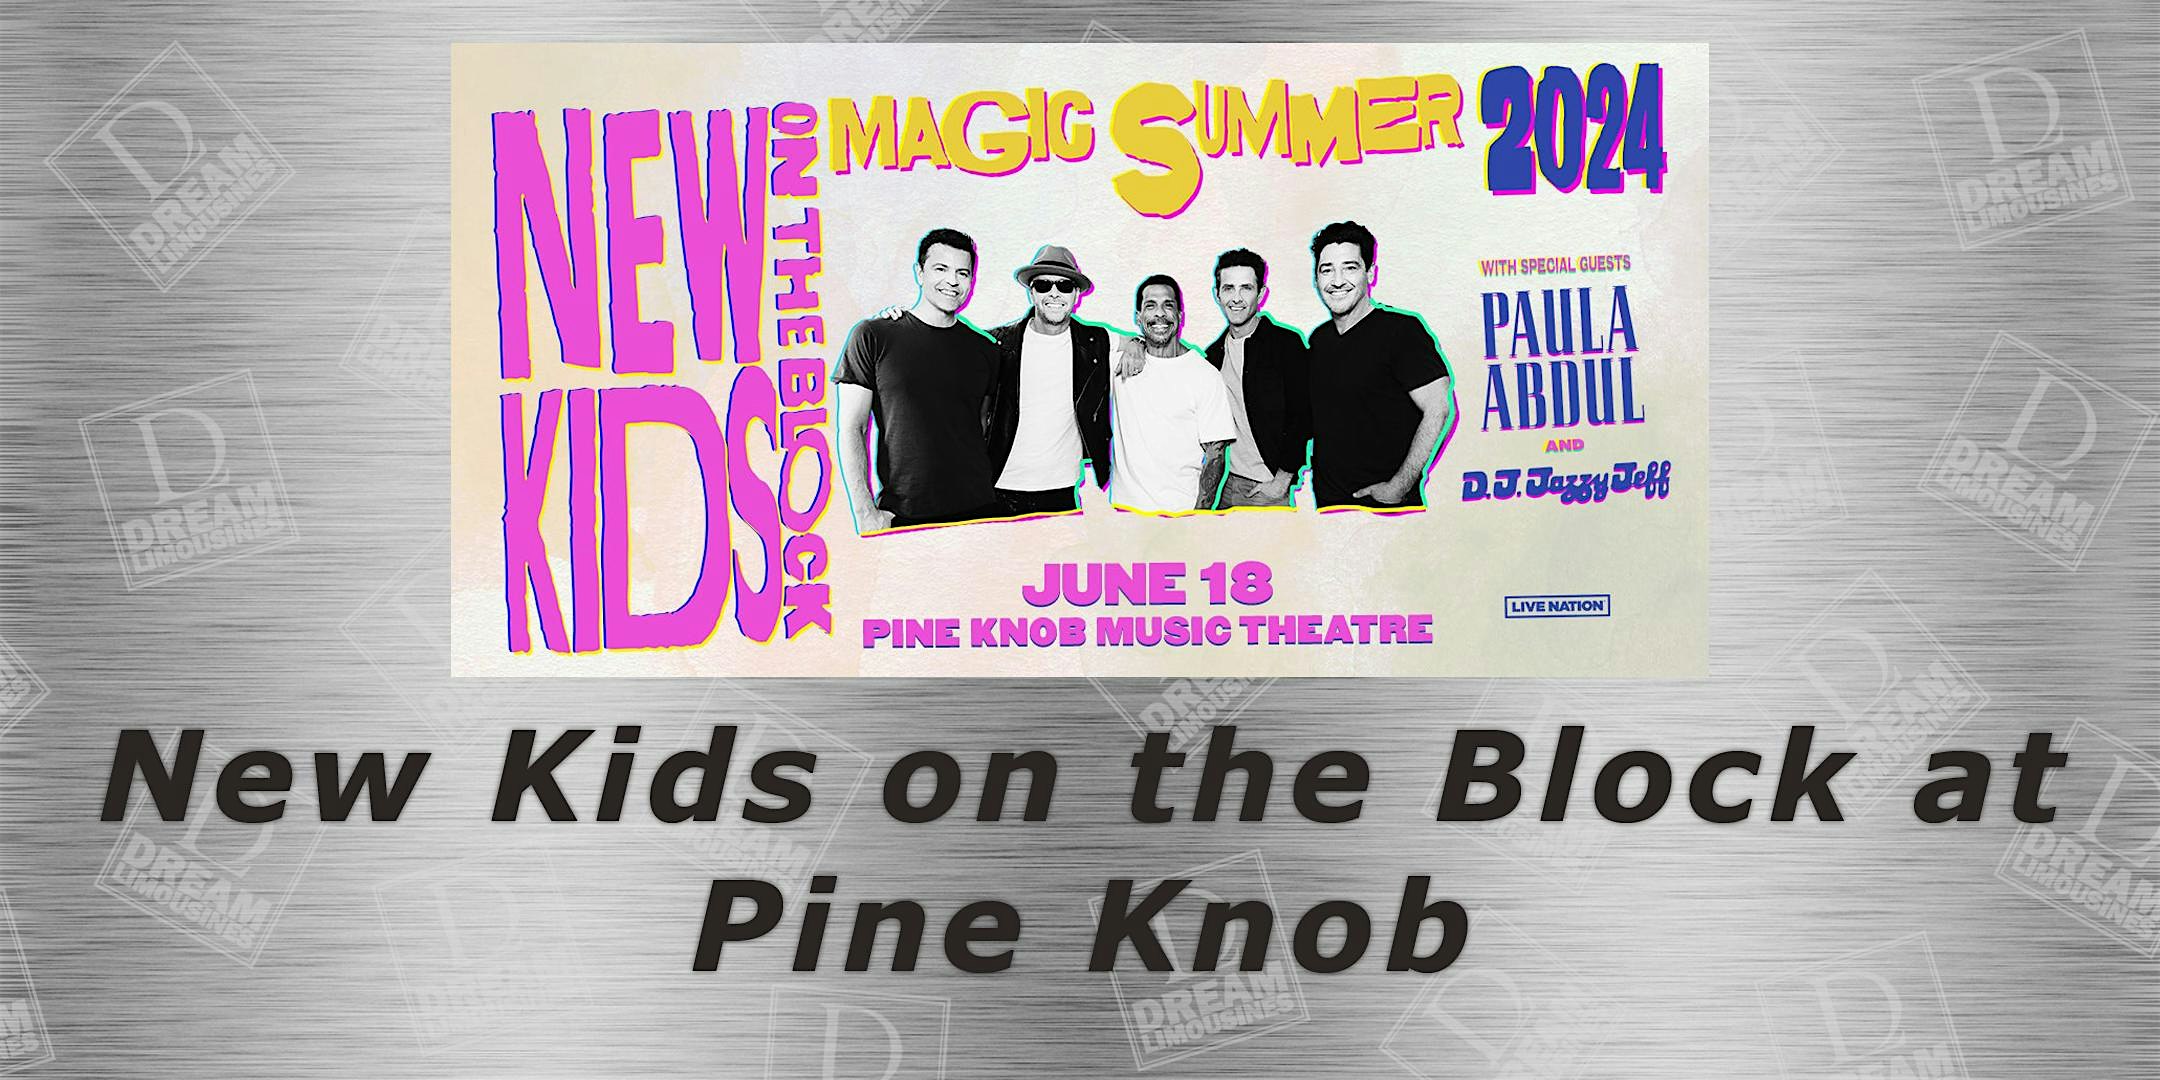 Shuttle Bus to See New Kids On The Block at Pine Knob Music Theatre